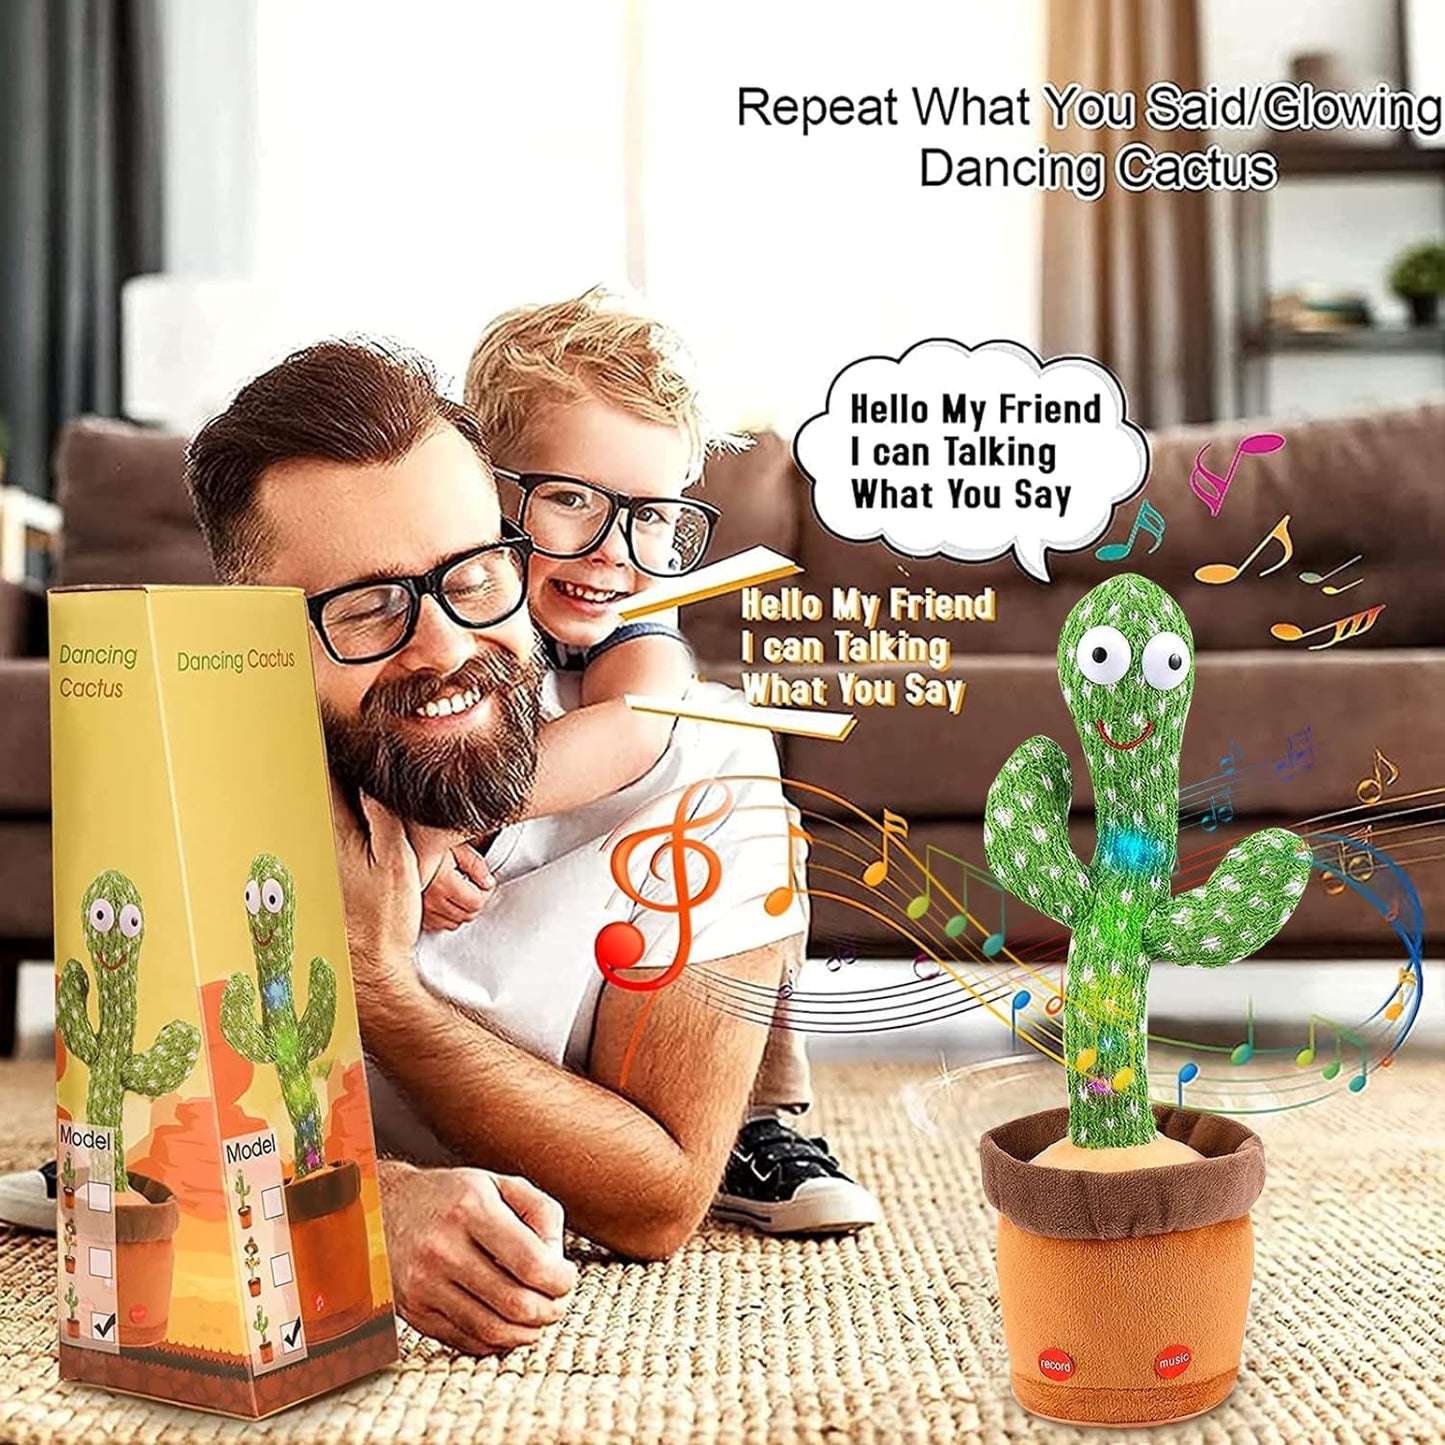 Dancing Cactus Baby Toys 6 to 12 Months, Talking Repeats What You Say Boy Toys, Mimicking Toy with LED English Sing 15 Second Voice Recorder Musical